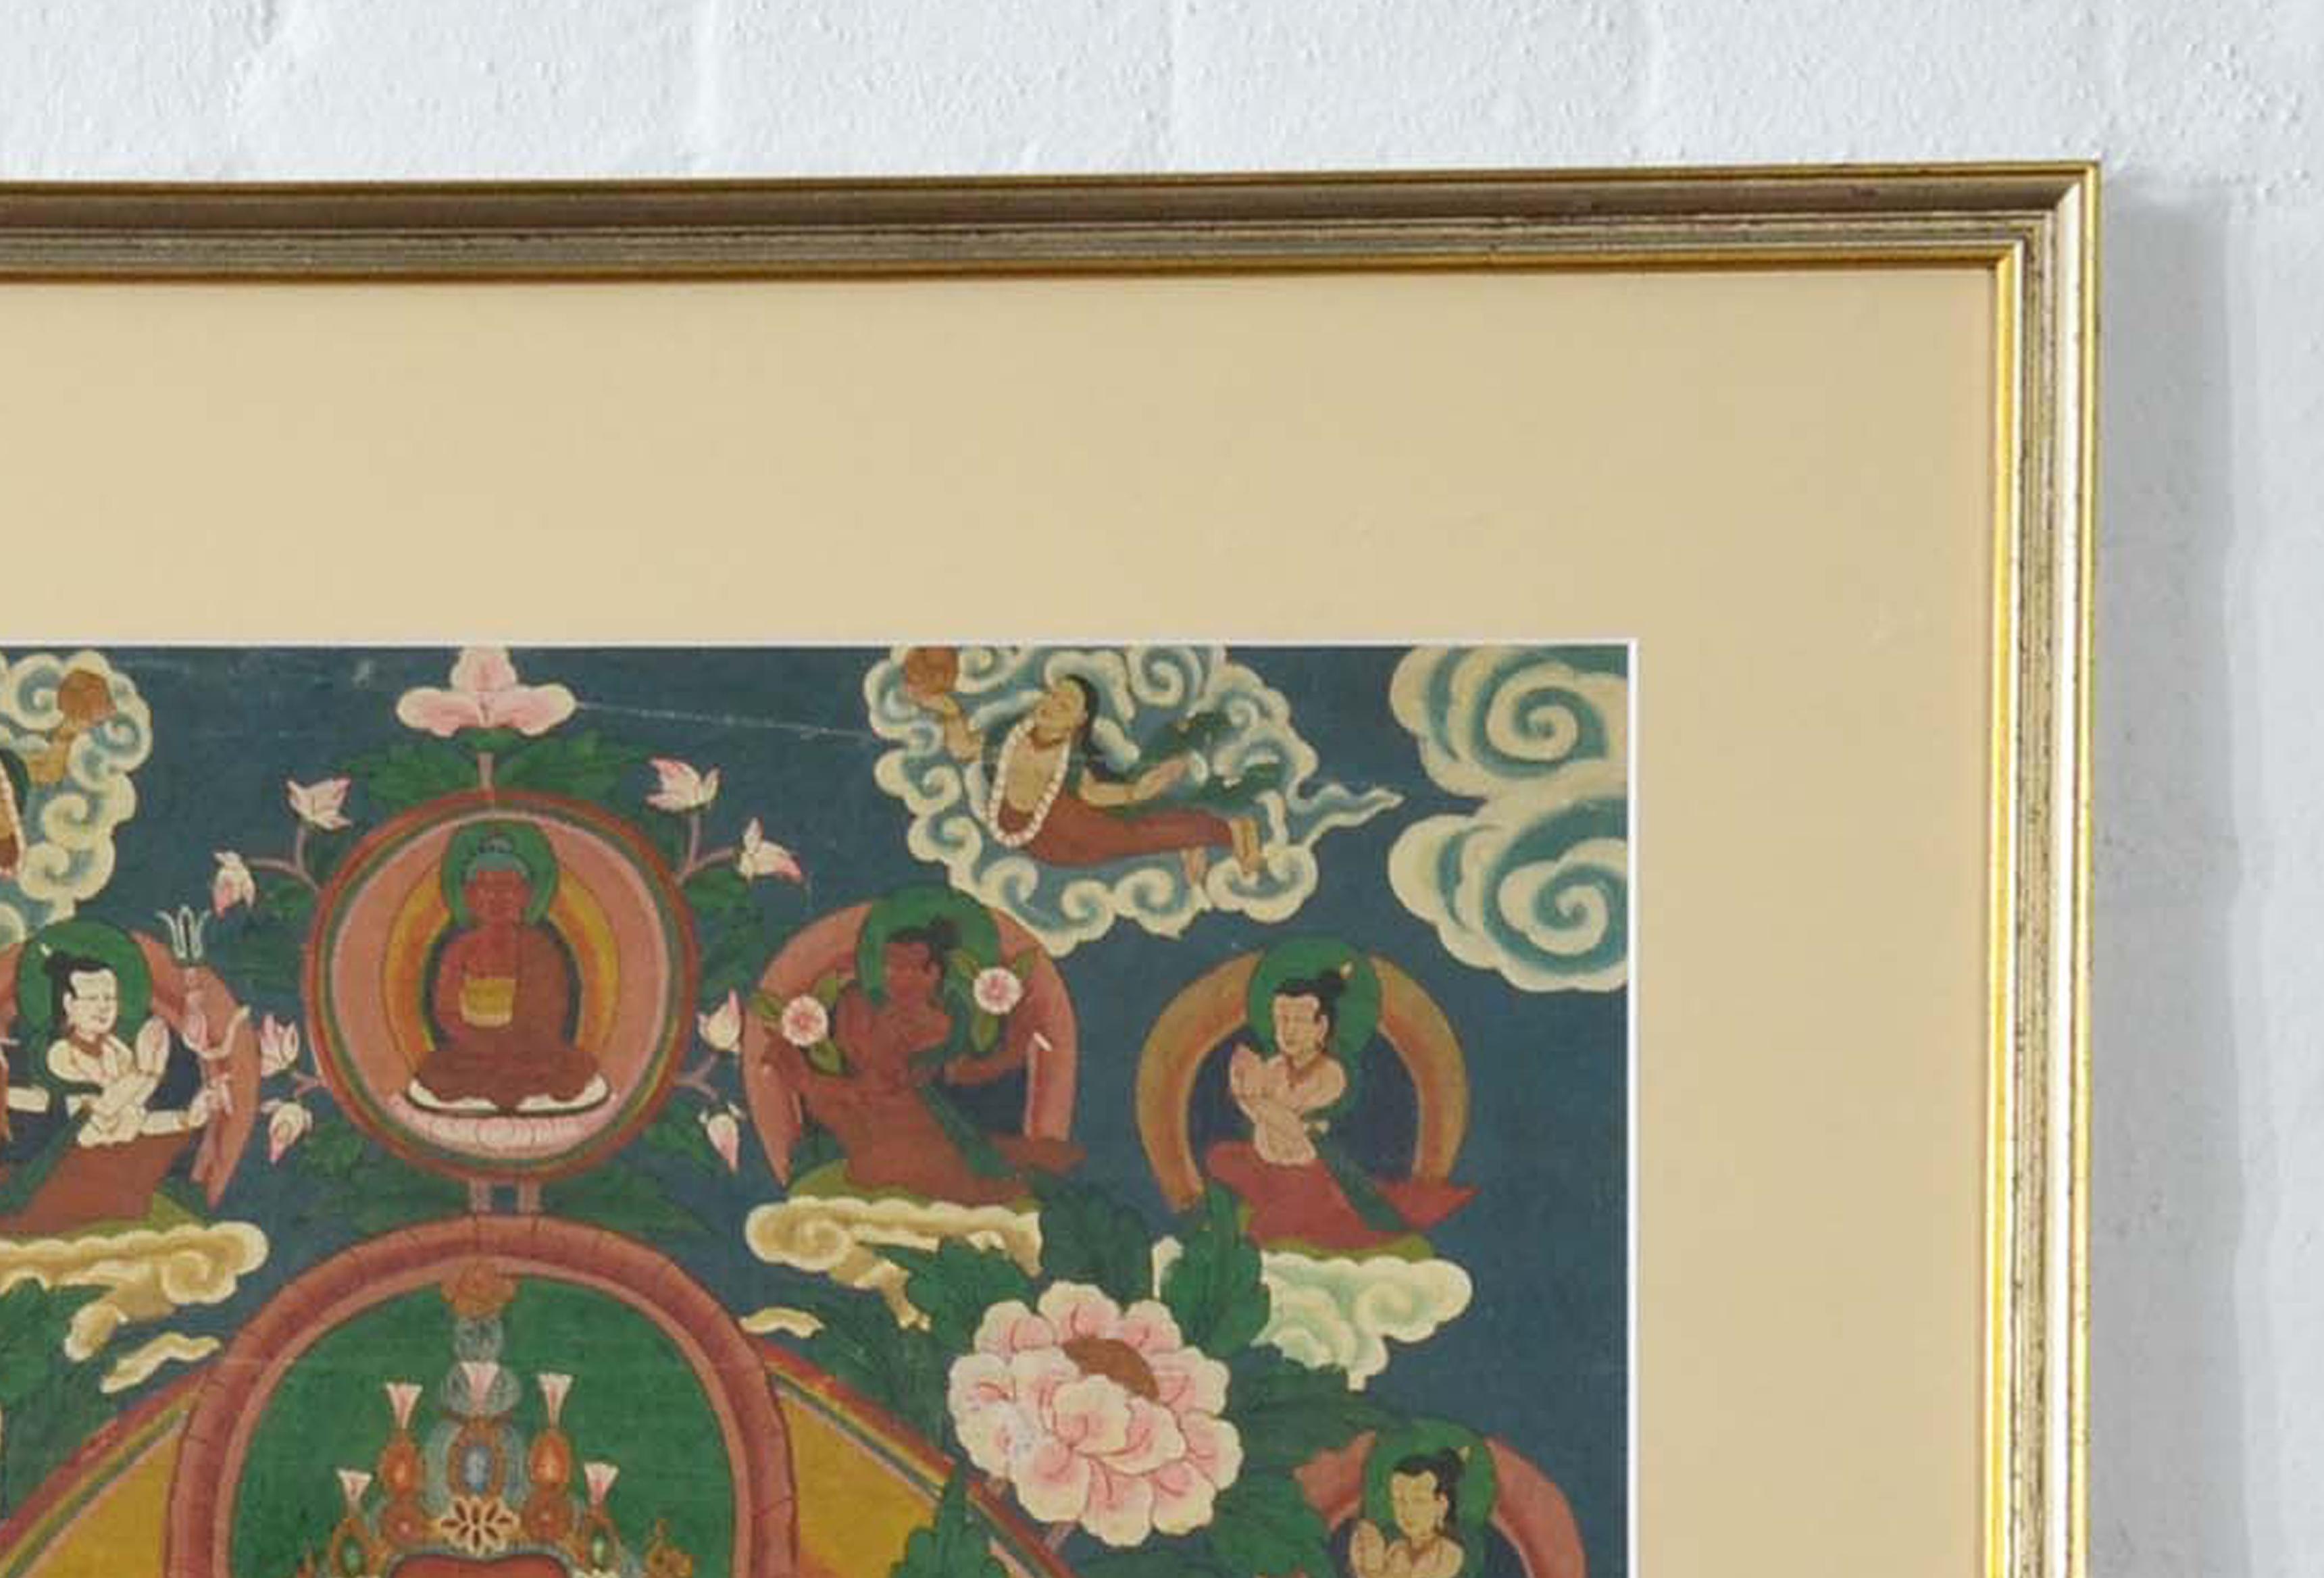 Indian Ceremonial Hindu Deity Hand-Painted on Canvas in Gilded Frame For Sale 2